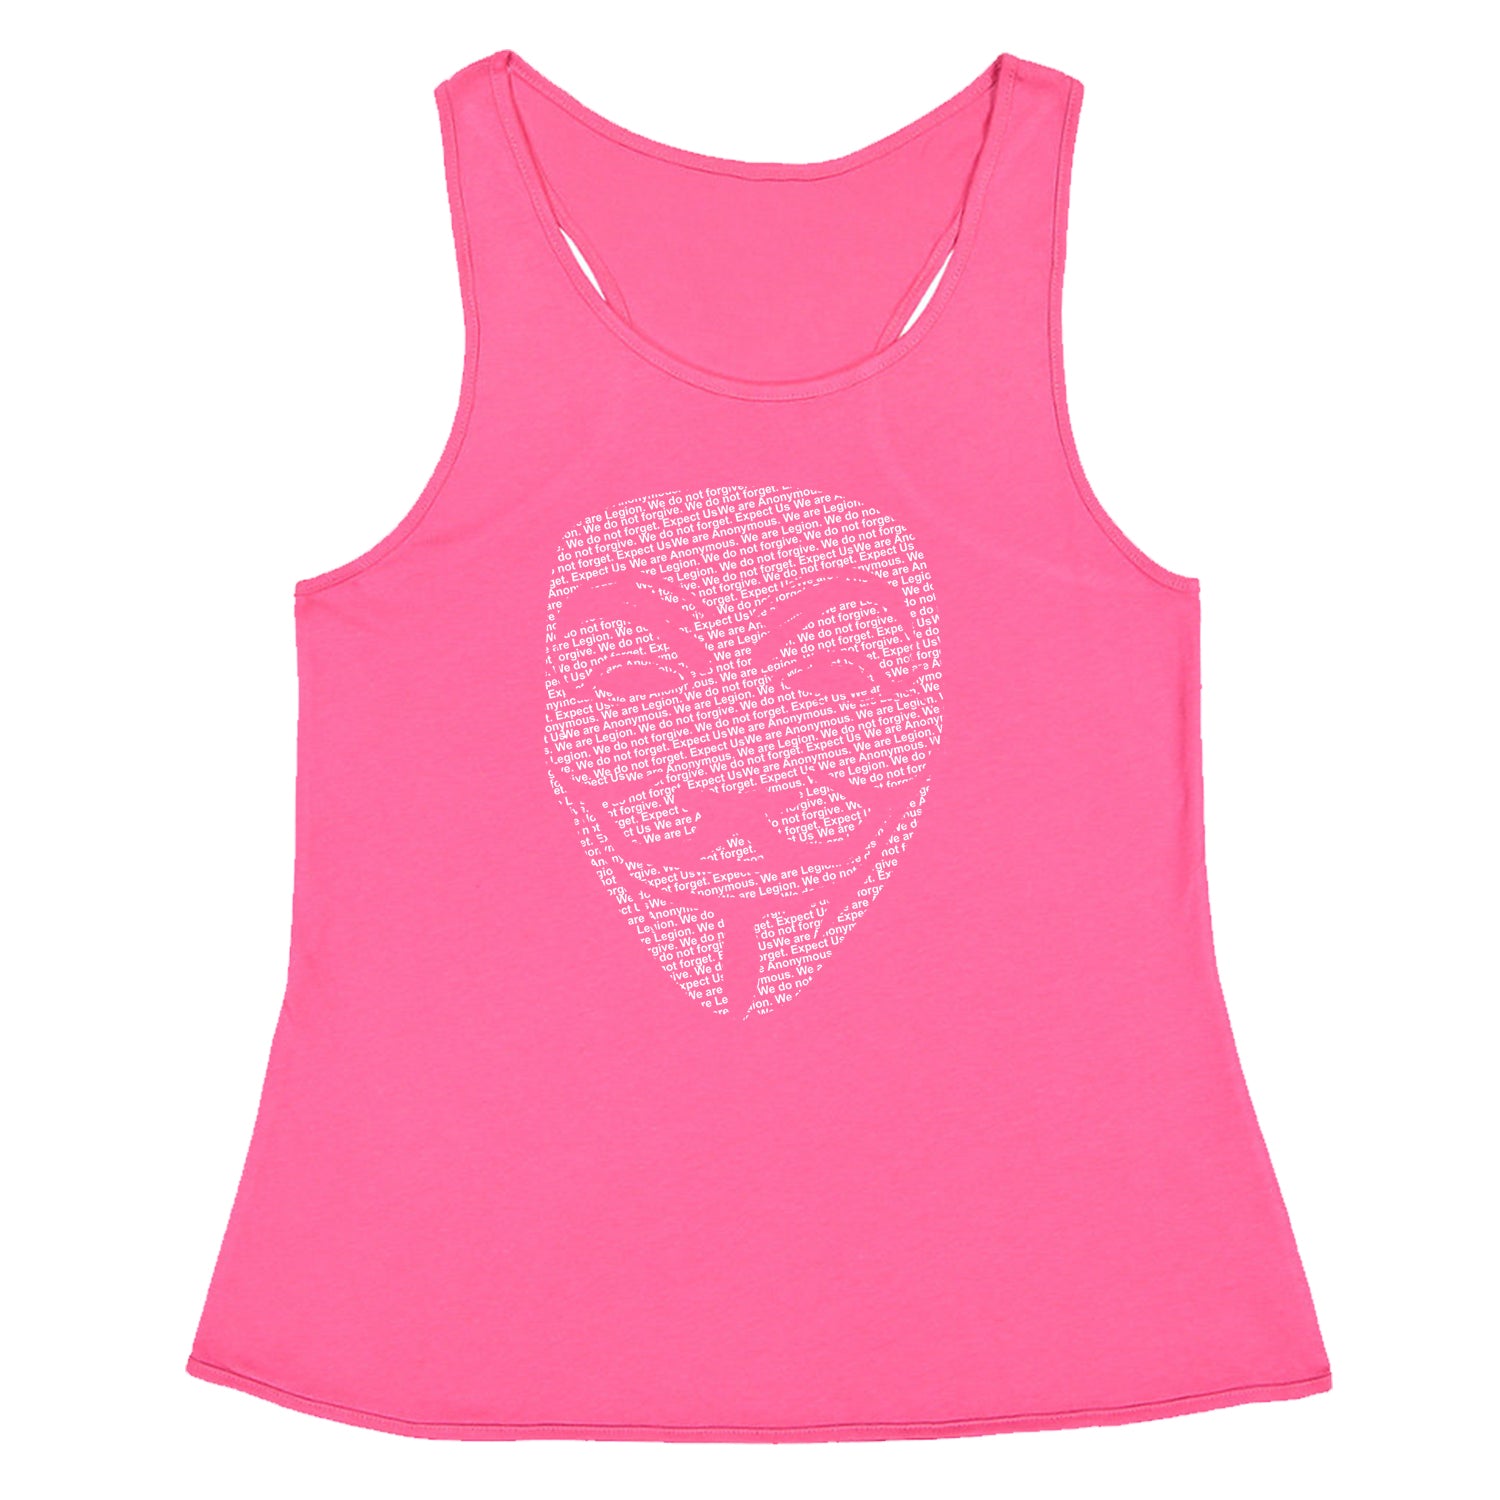 V For Vendetta Anonymous Mask Racerback Tank Top for Women #expressiontees by Expression Tees